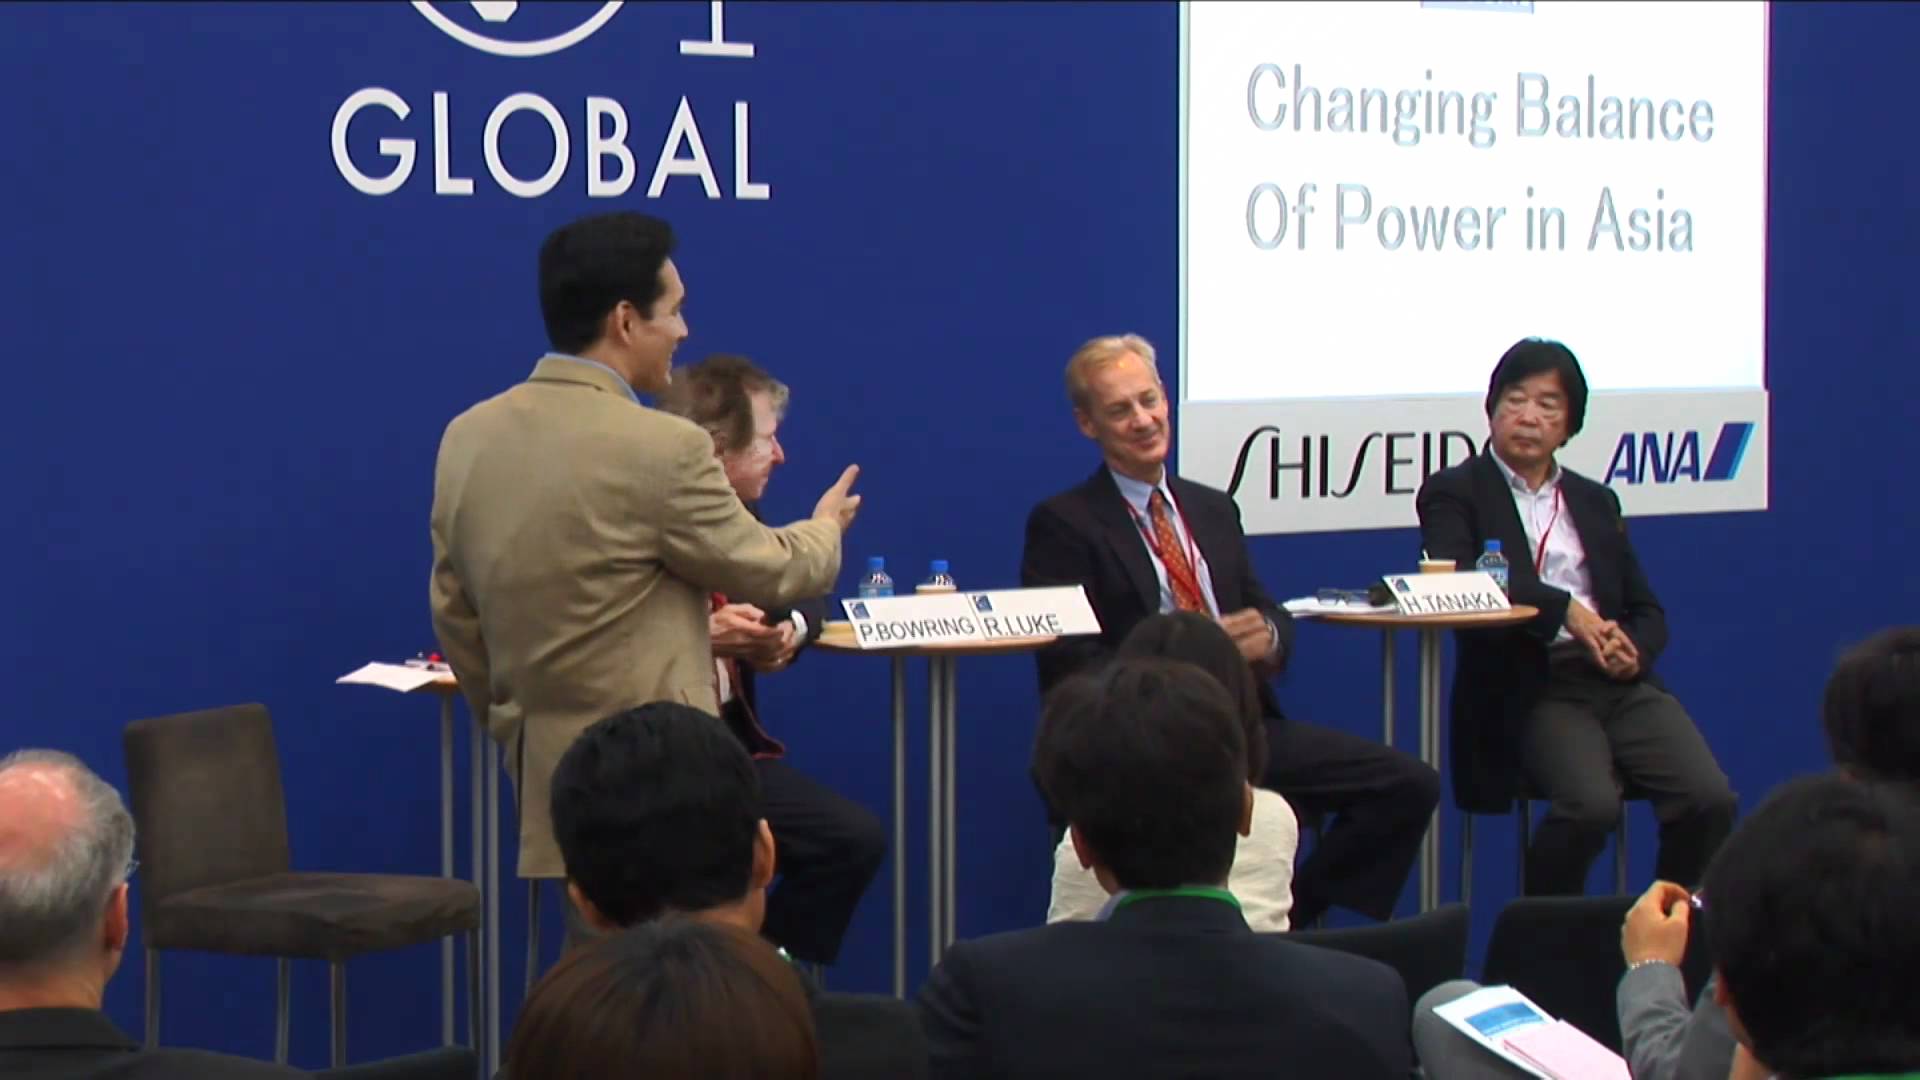 Part2 - Changing Balance of Power in Asia (G1 Global Conference 2011)